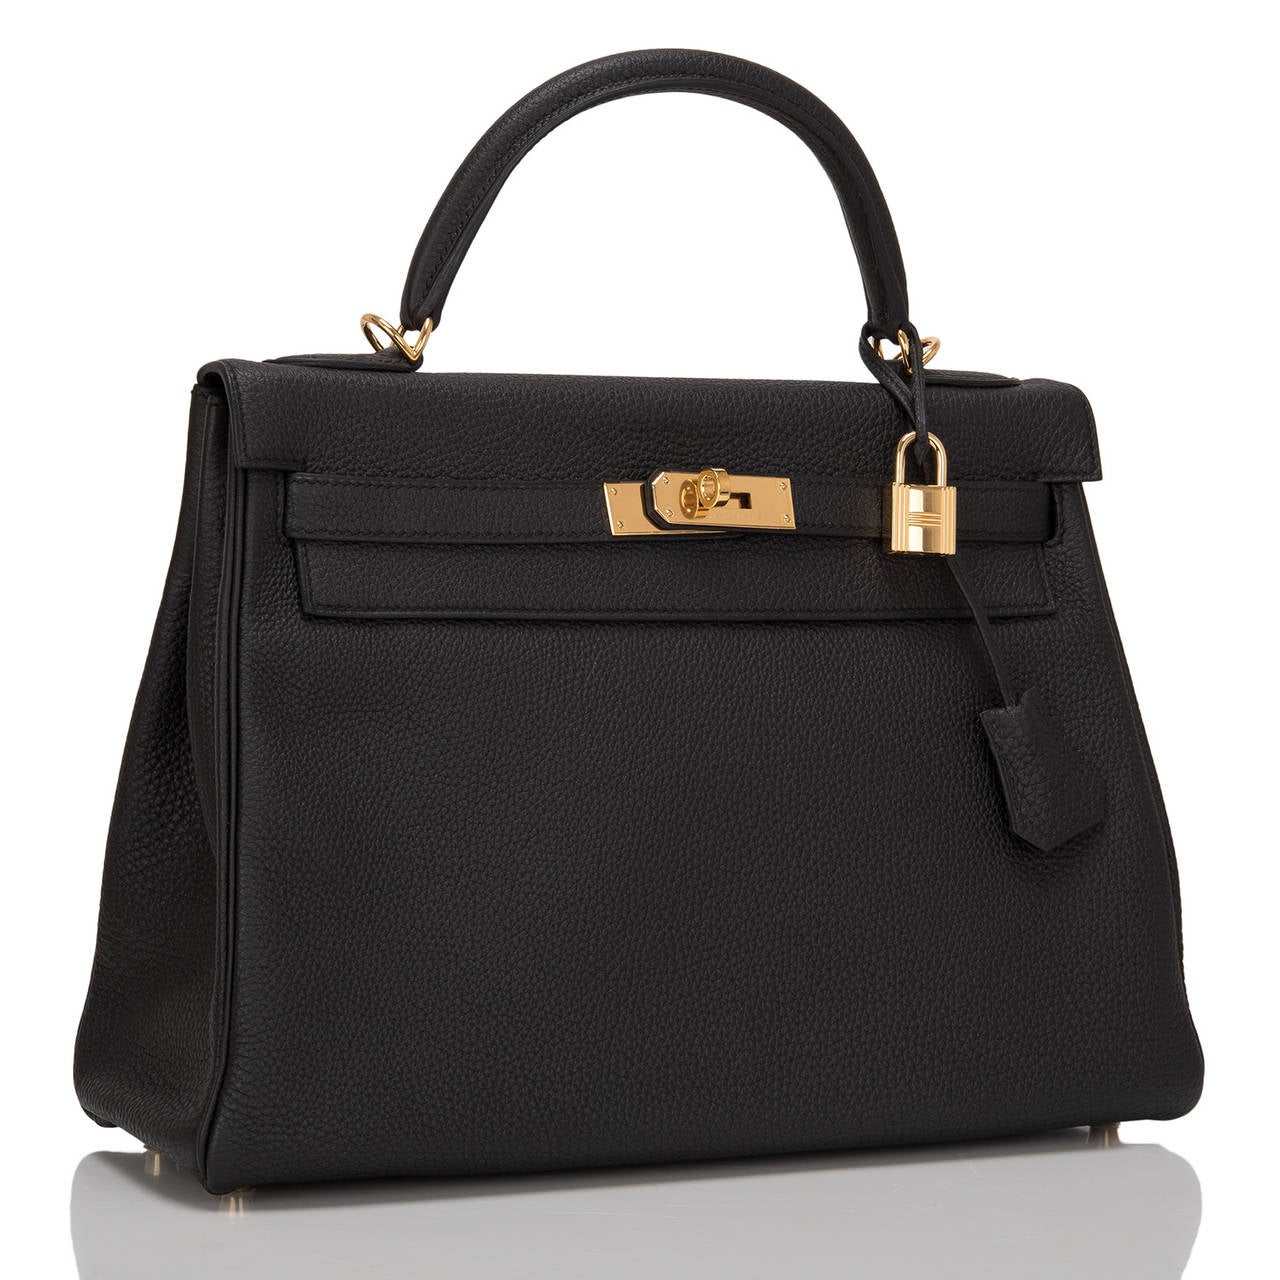 Hermes Black Kelly 32cm in rich togo (bull) leather with gold hardware.

This Kelly features tonal stitching, front toggle closure, a clochette with lock and two keys and a single rolled handle. The interior is lined in black chevre and features